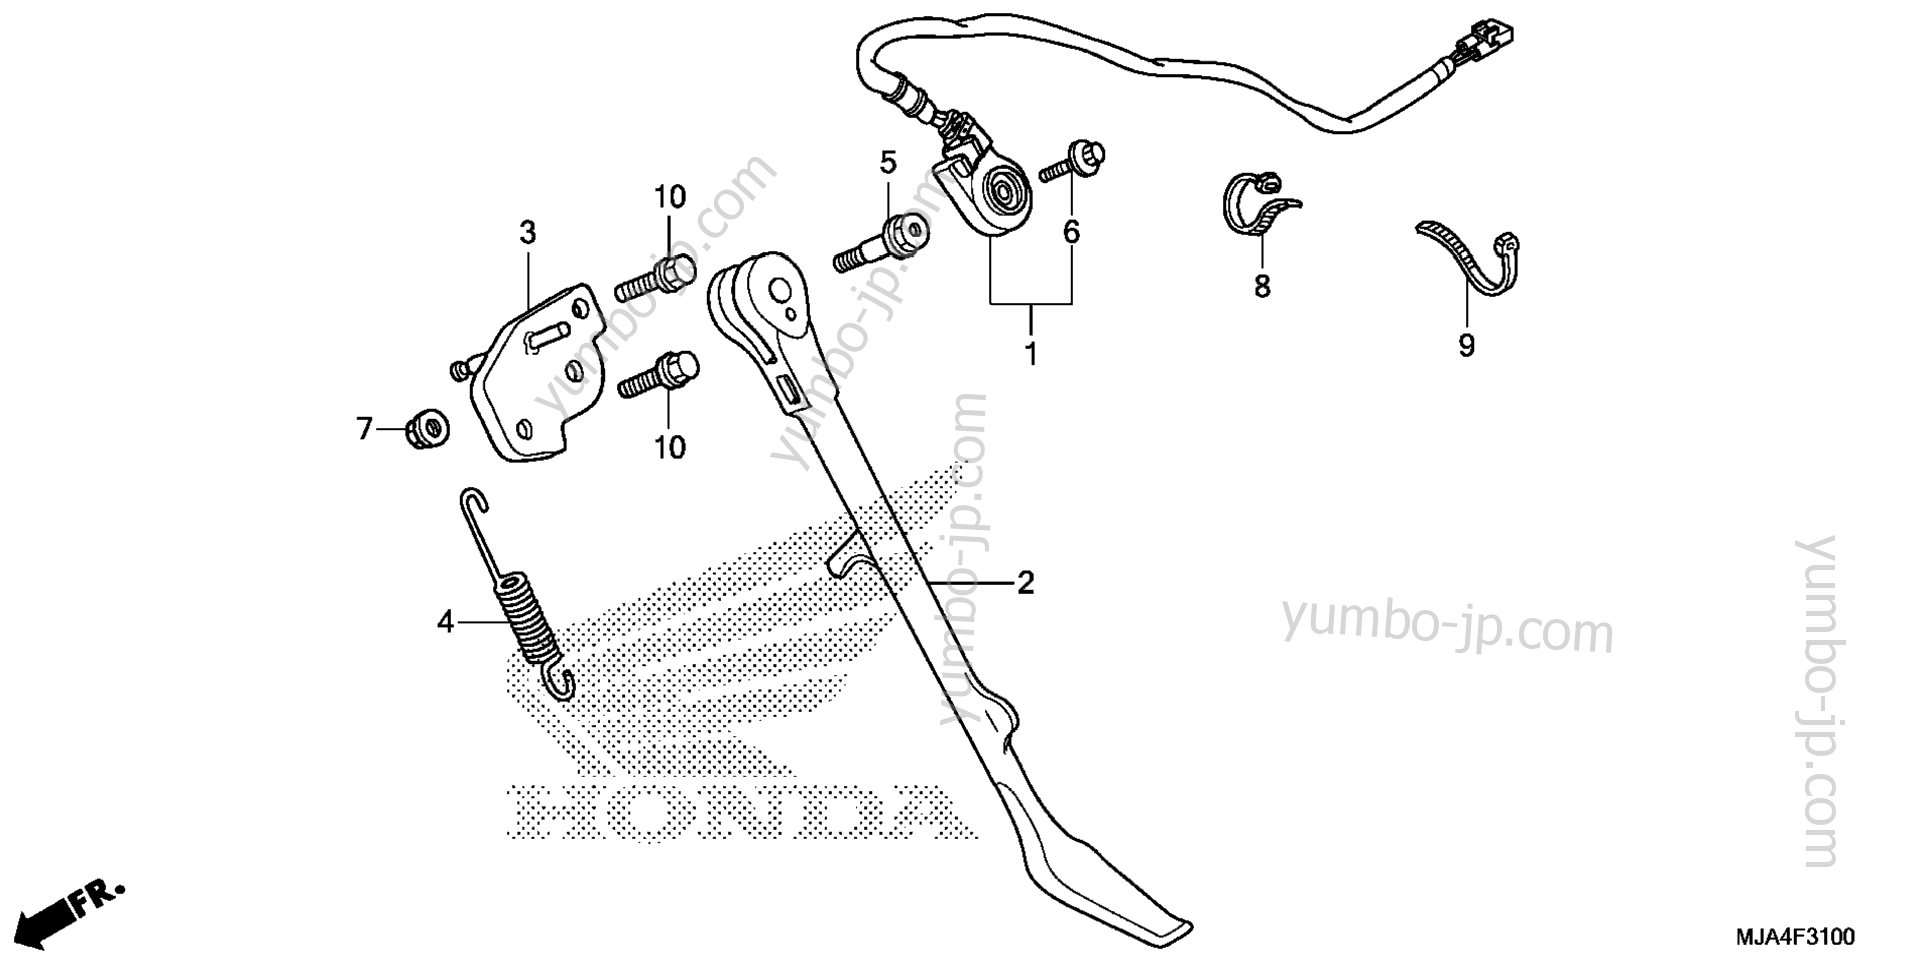 SIDE STAND (1) for motorcycles HONDA VT750CA A 2012 year